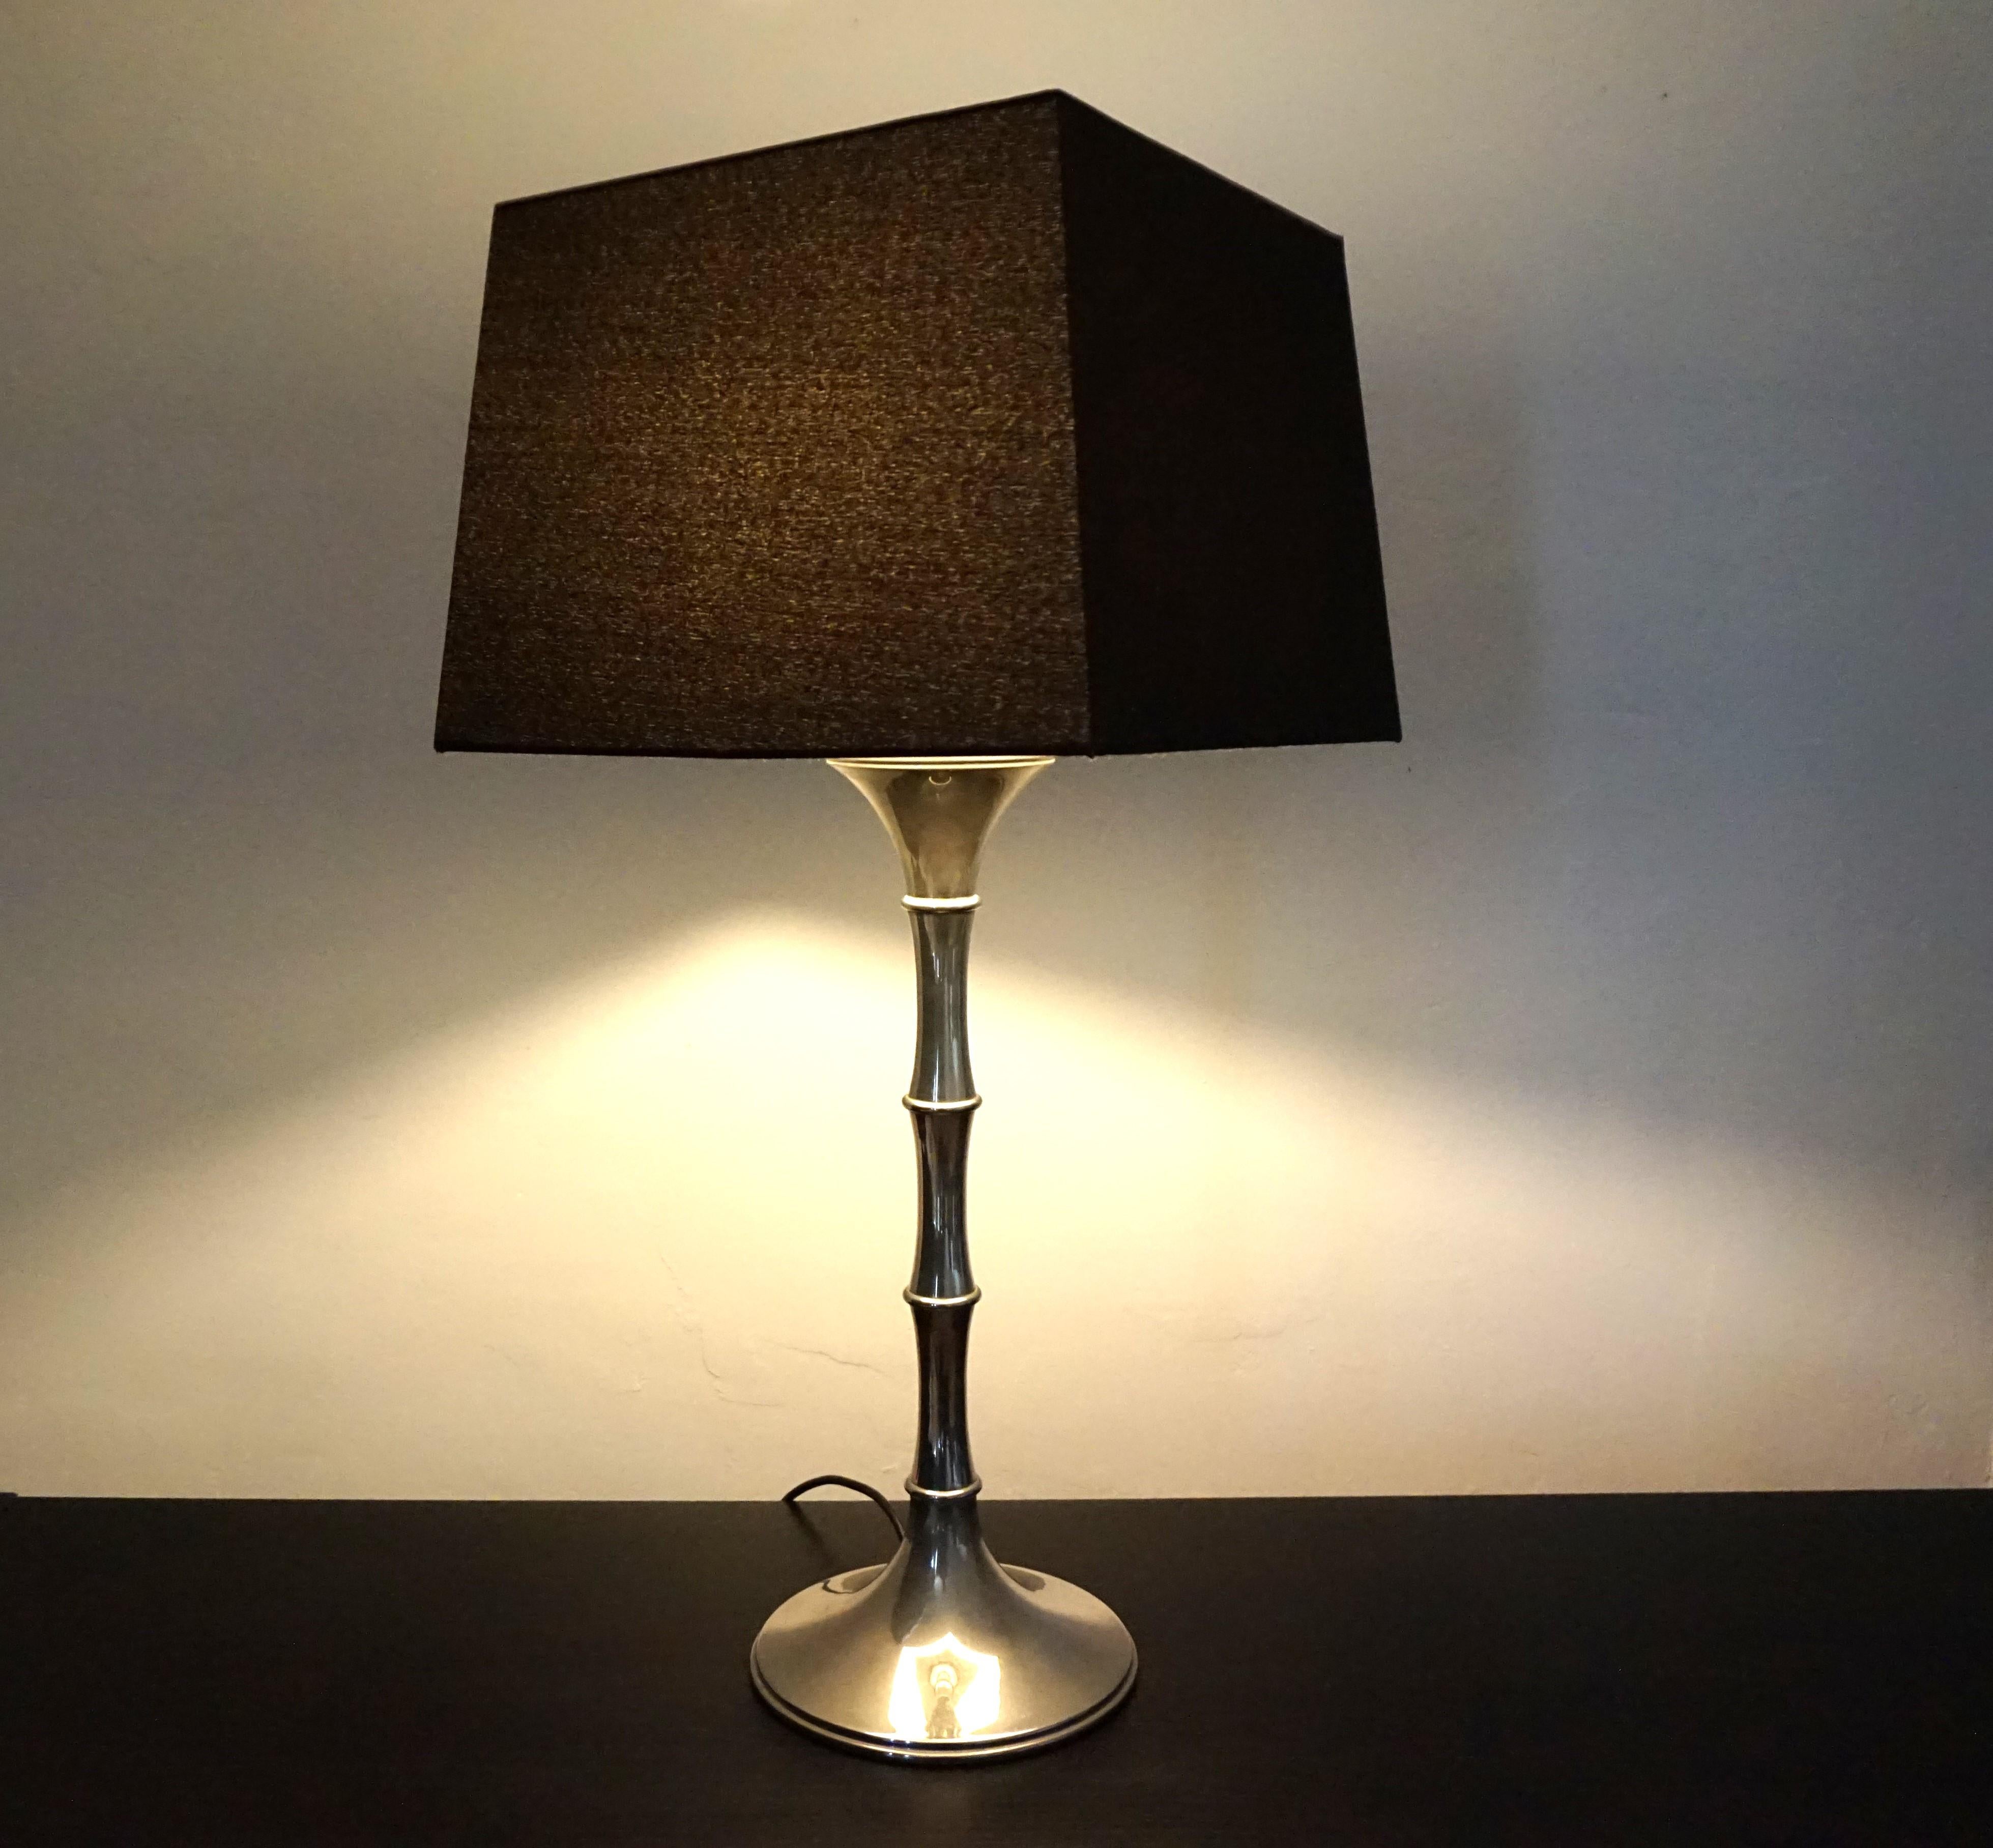 The table lamp made of chrome-plated metal is in very good condition with an attractive patina. The lamp dates from the 1960s and its design is based on a bamboo trunk. Ingo Maurer is known for his high-quality lights. The table lamp was rewired.